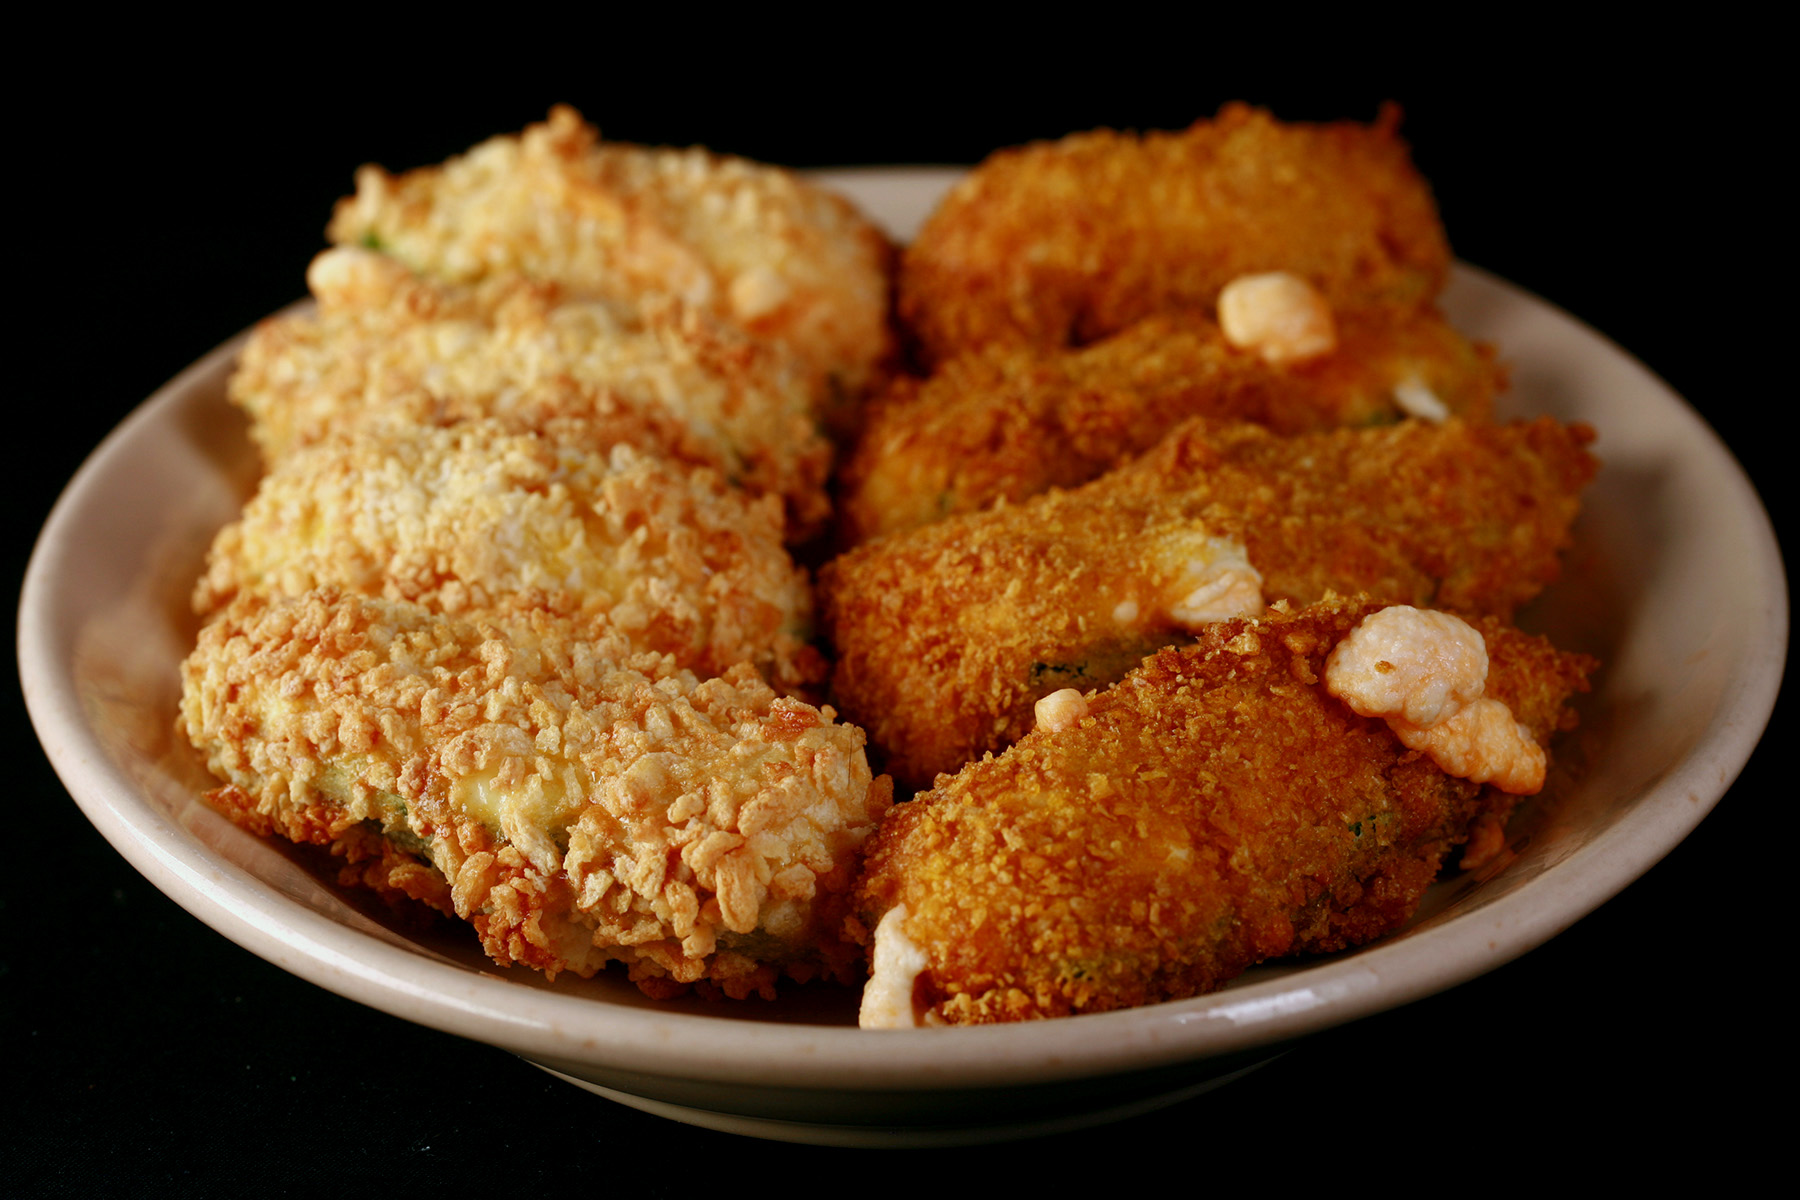 A small ivory colour plate holds two different types of gluten-free jalapeno poppers.